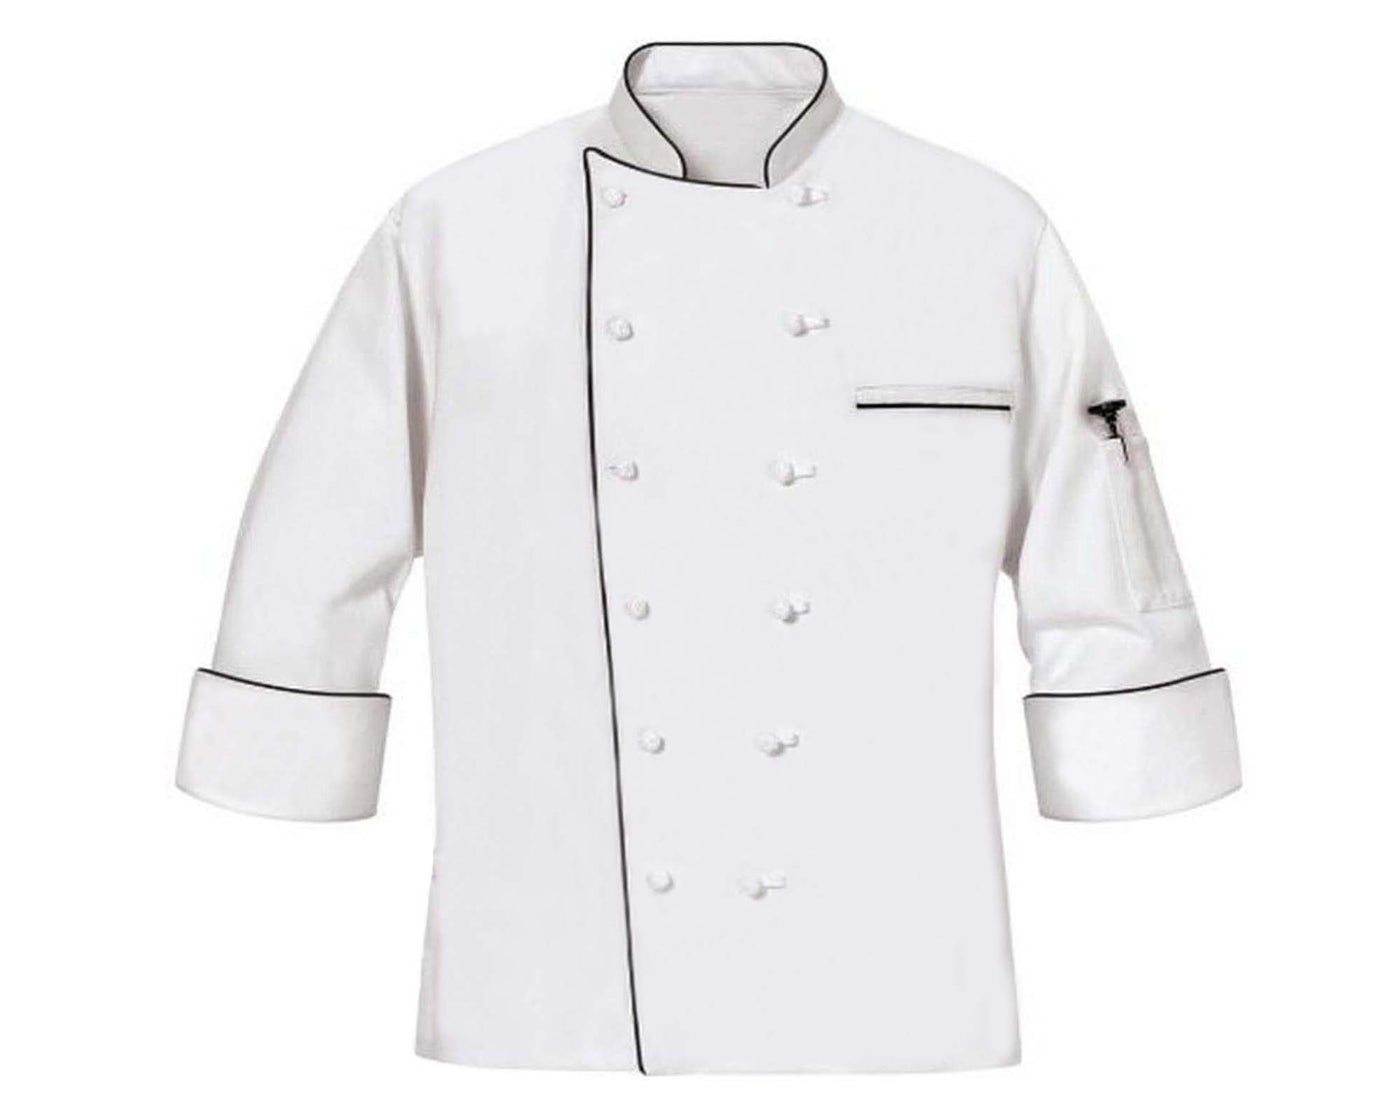 white chef coat with black piping also called as master chef coat